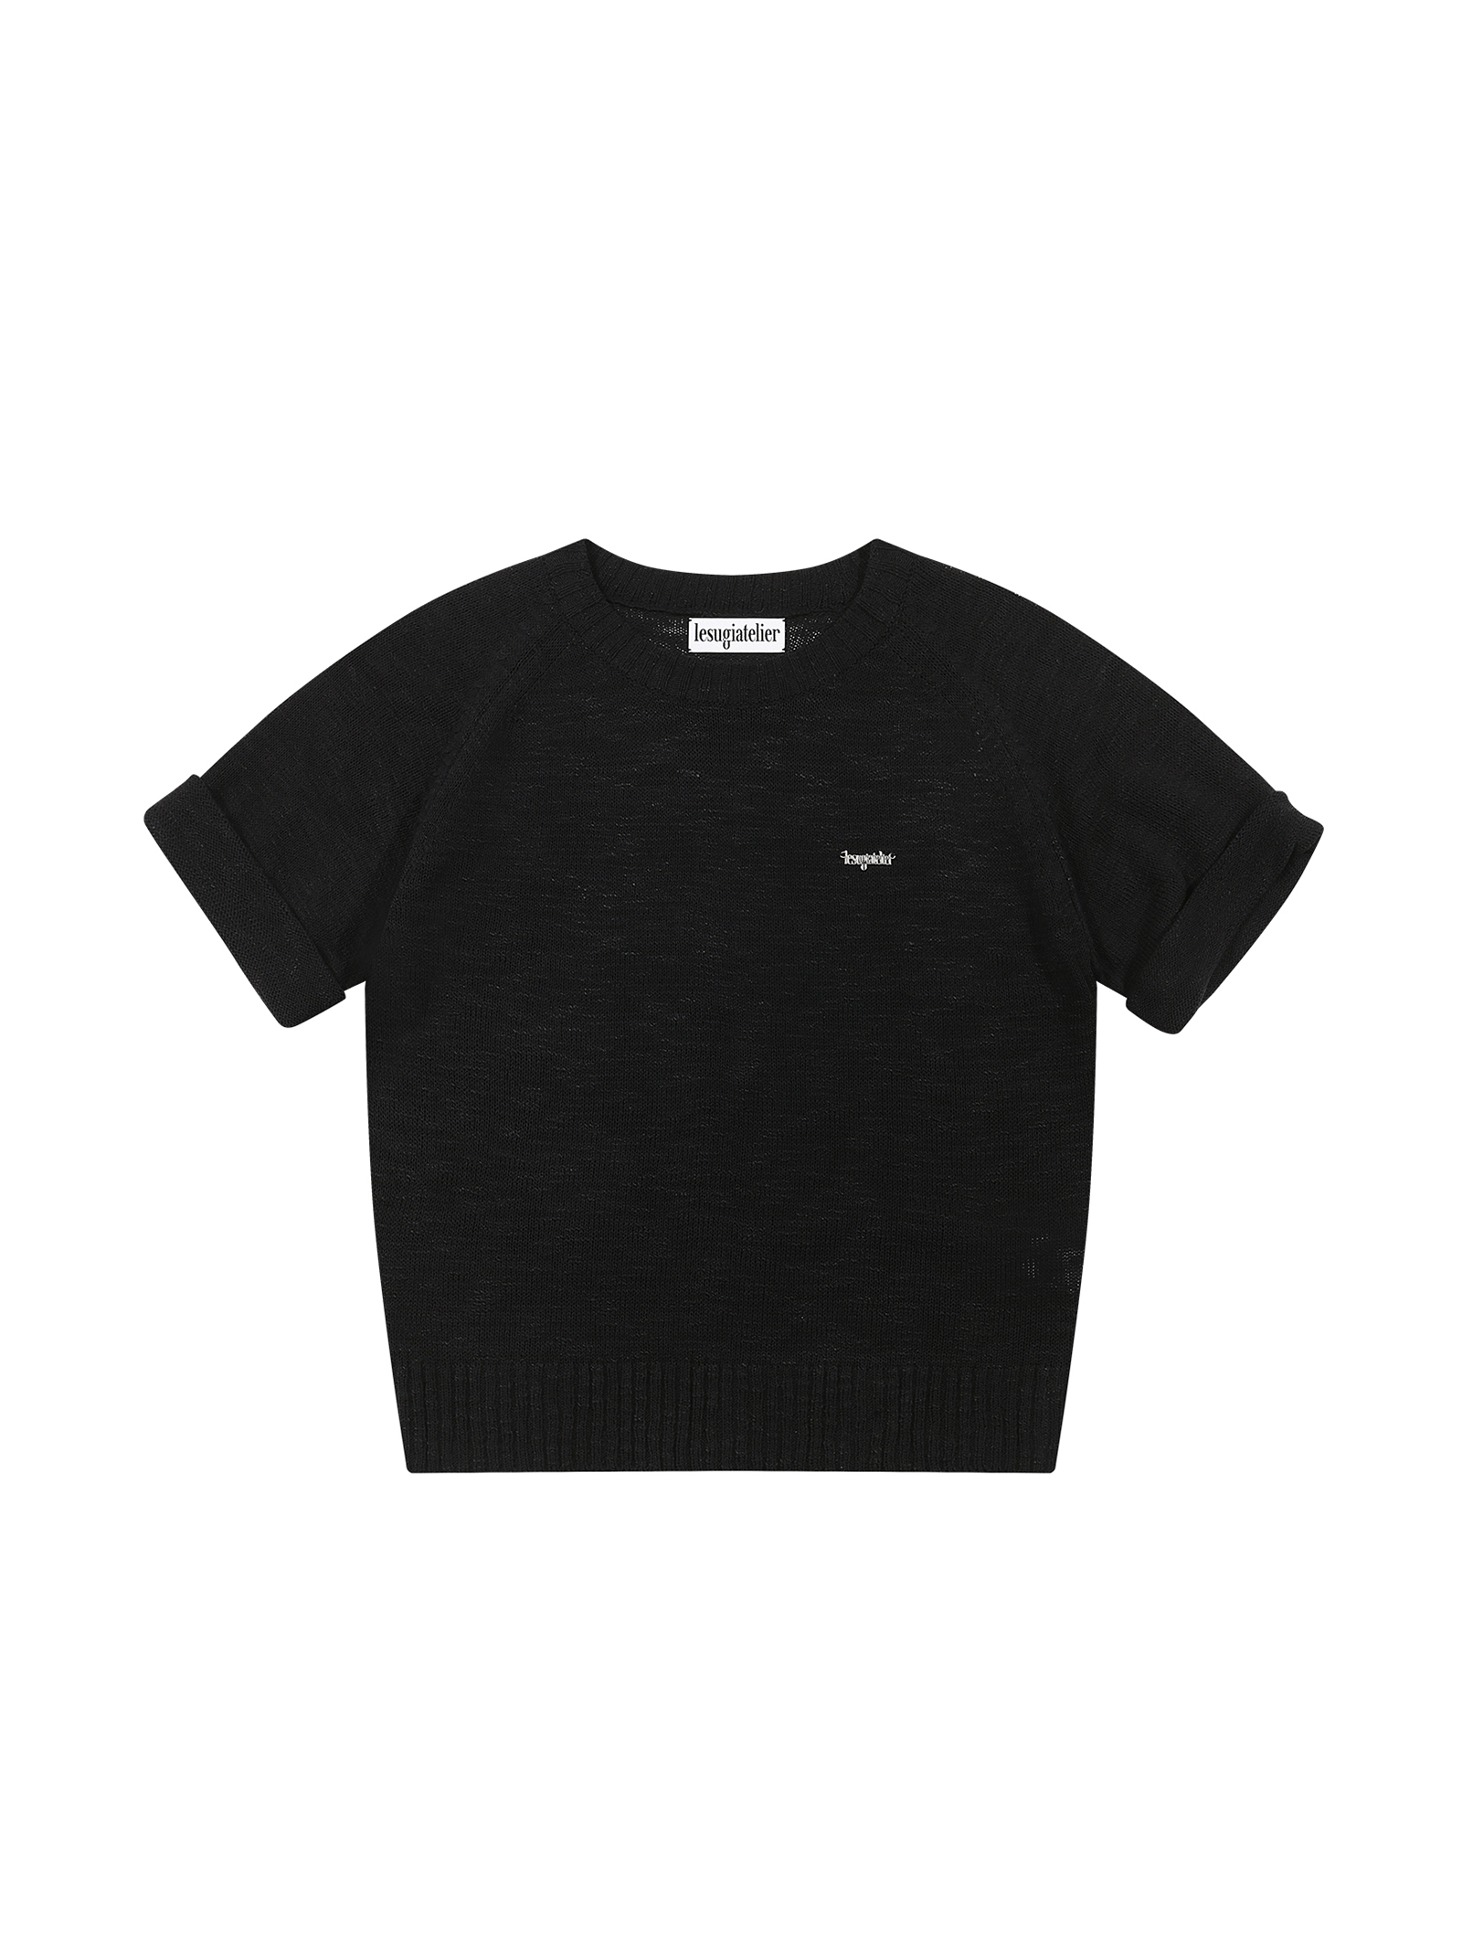 Rolled up sweater / Black